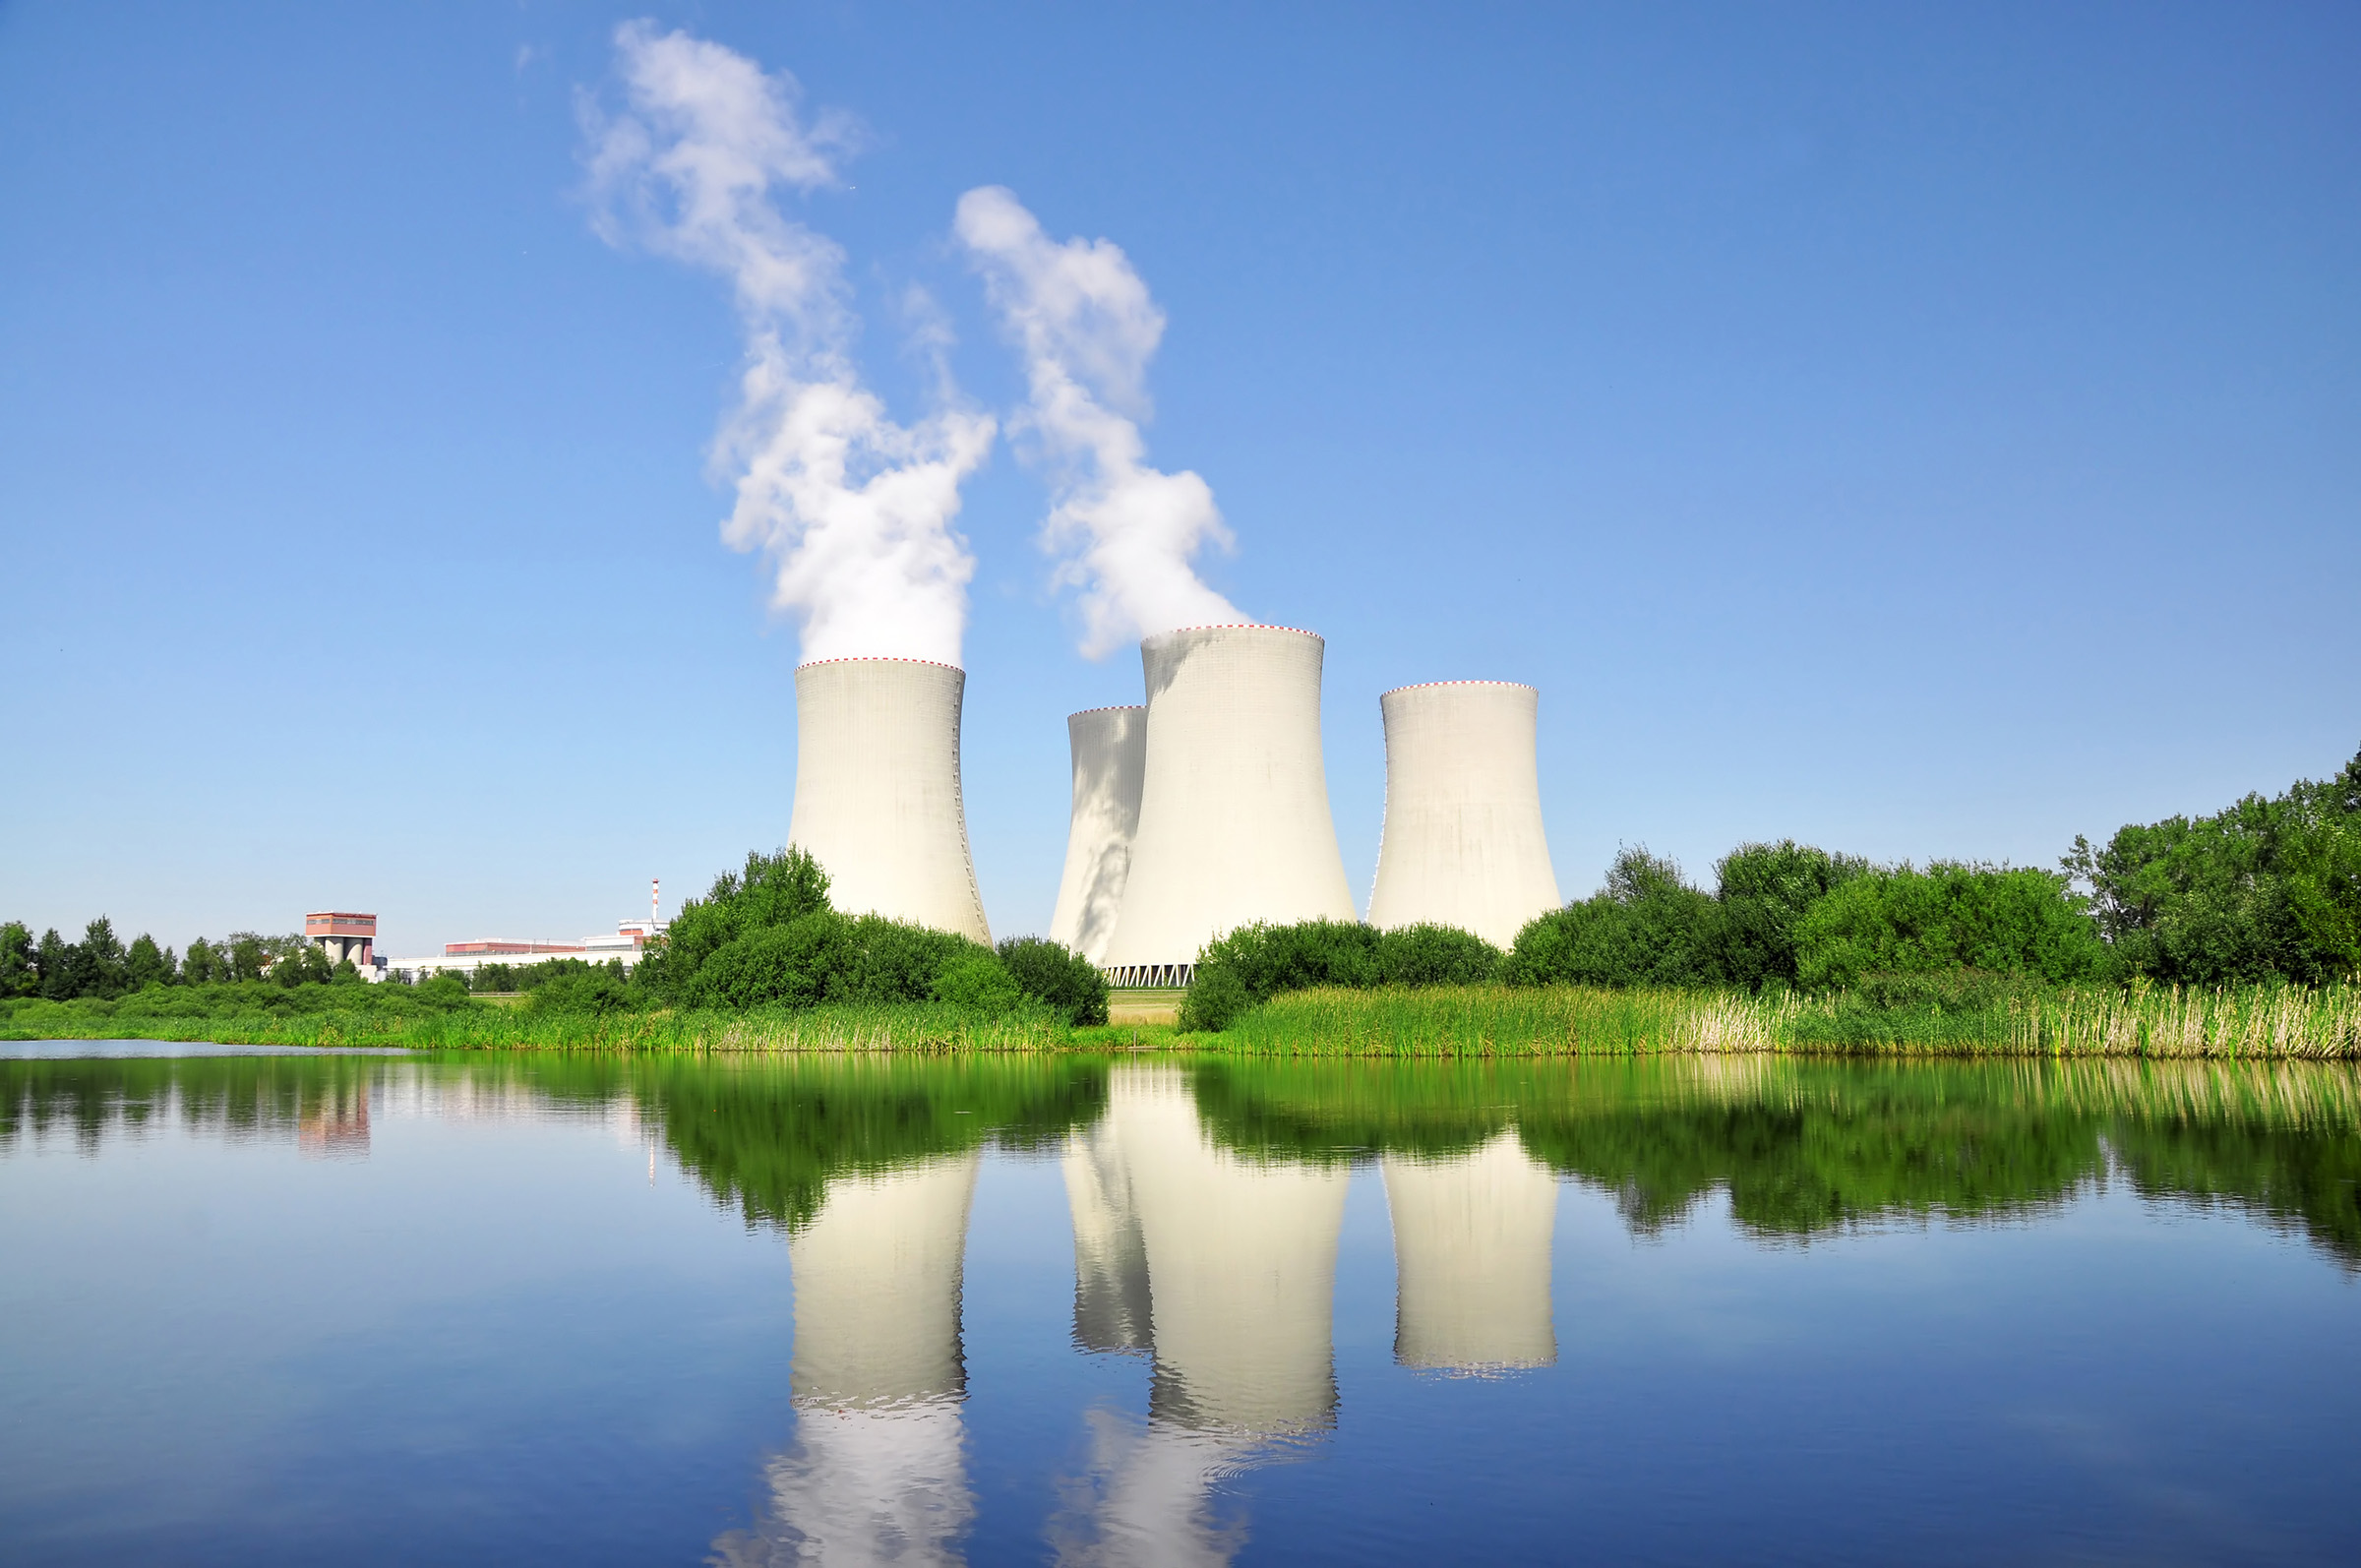 Xcel Energy admits its nuclear power plant leaked 400,000 gallons of radioactive water